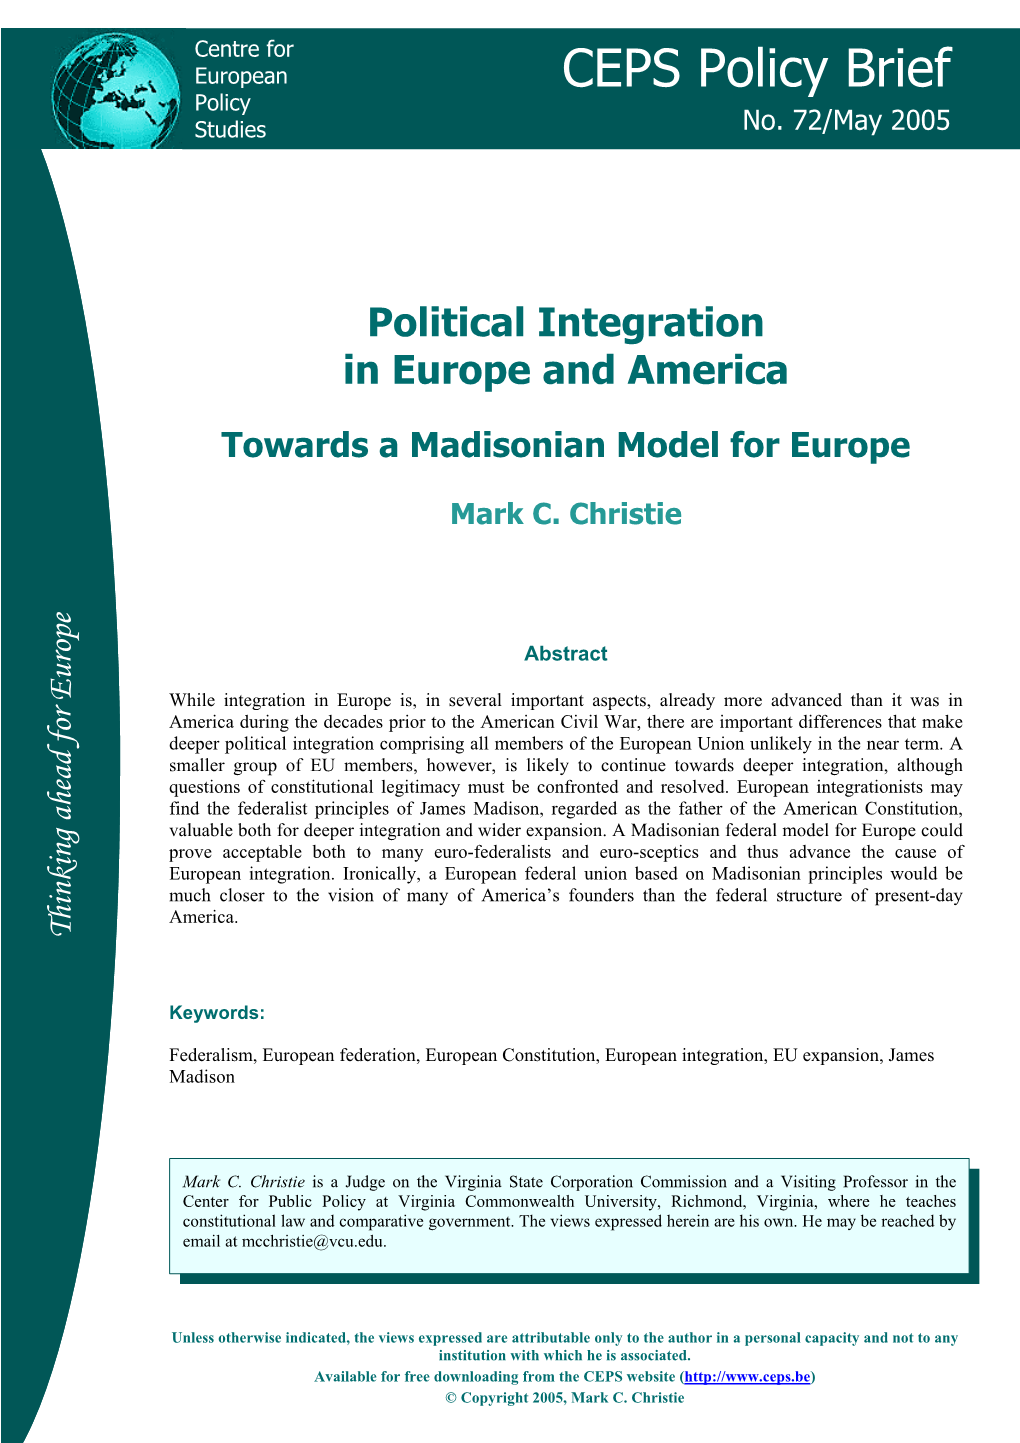 Towards a Madisonian Model for Europe